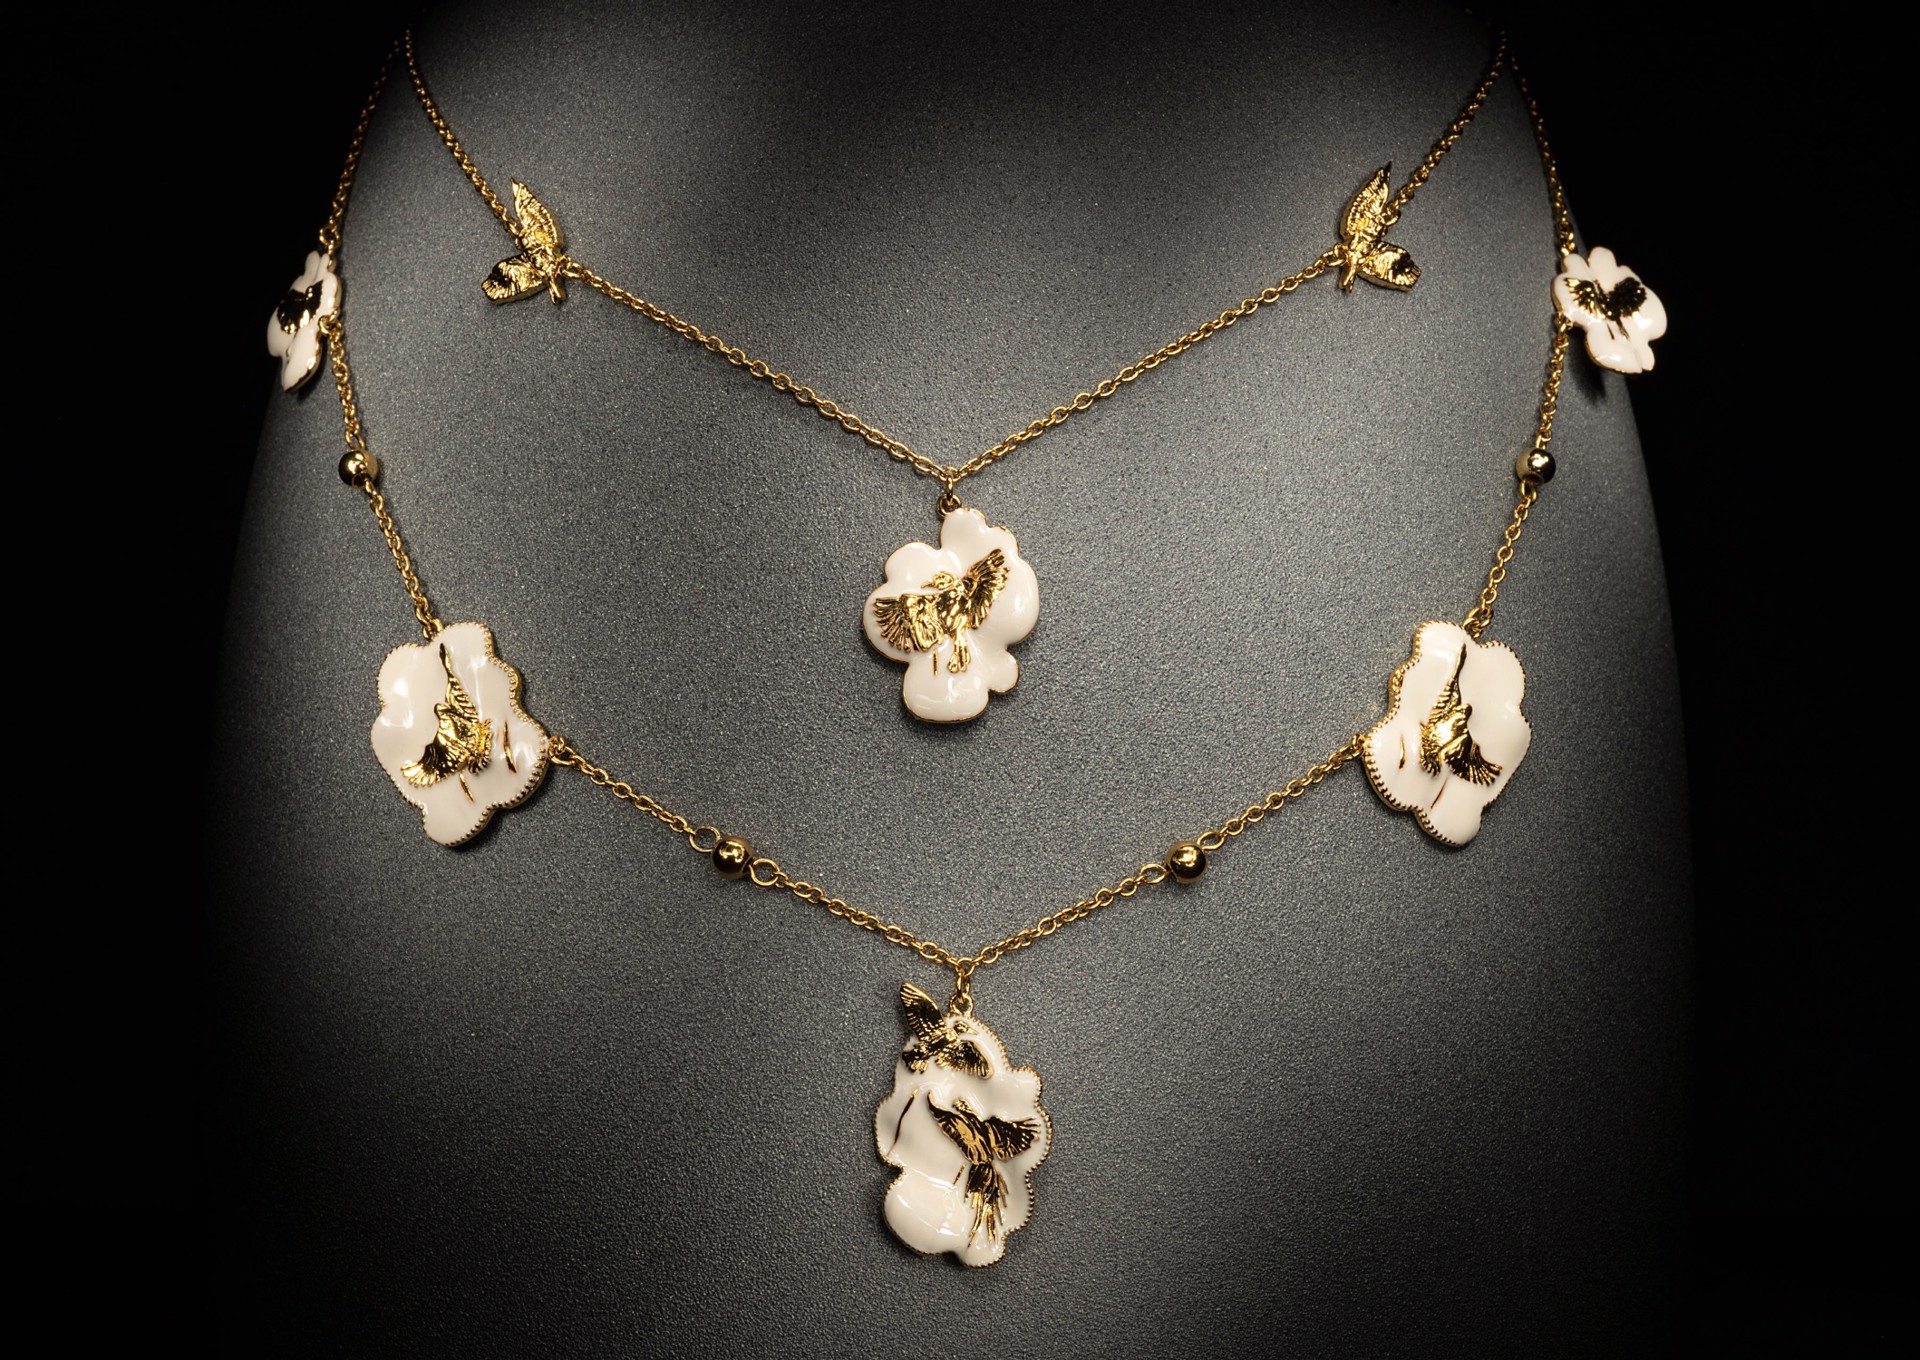 Arise Necklace - Gold and Ivory by Angela Mia